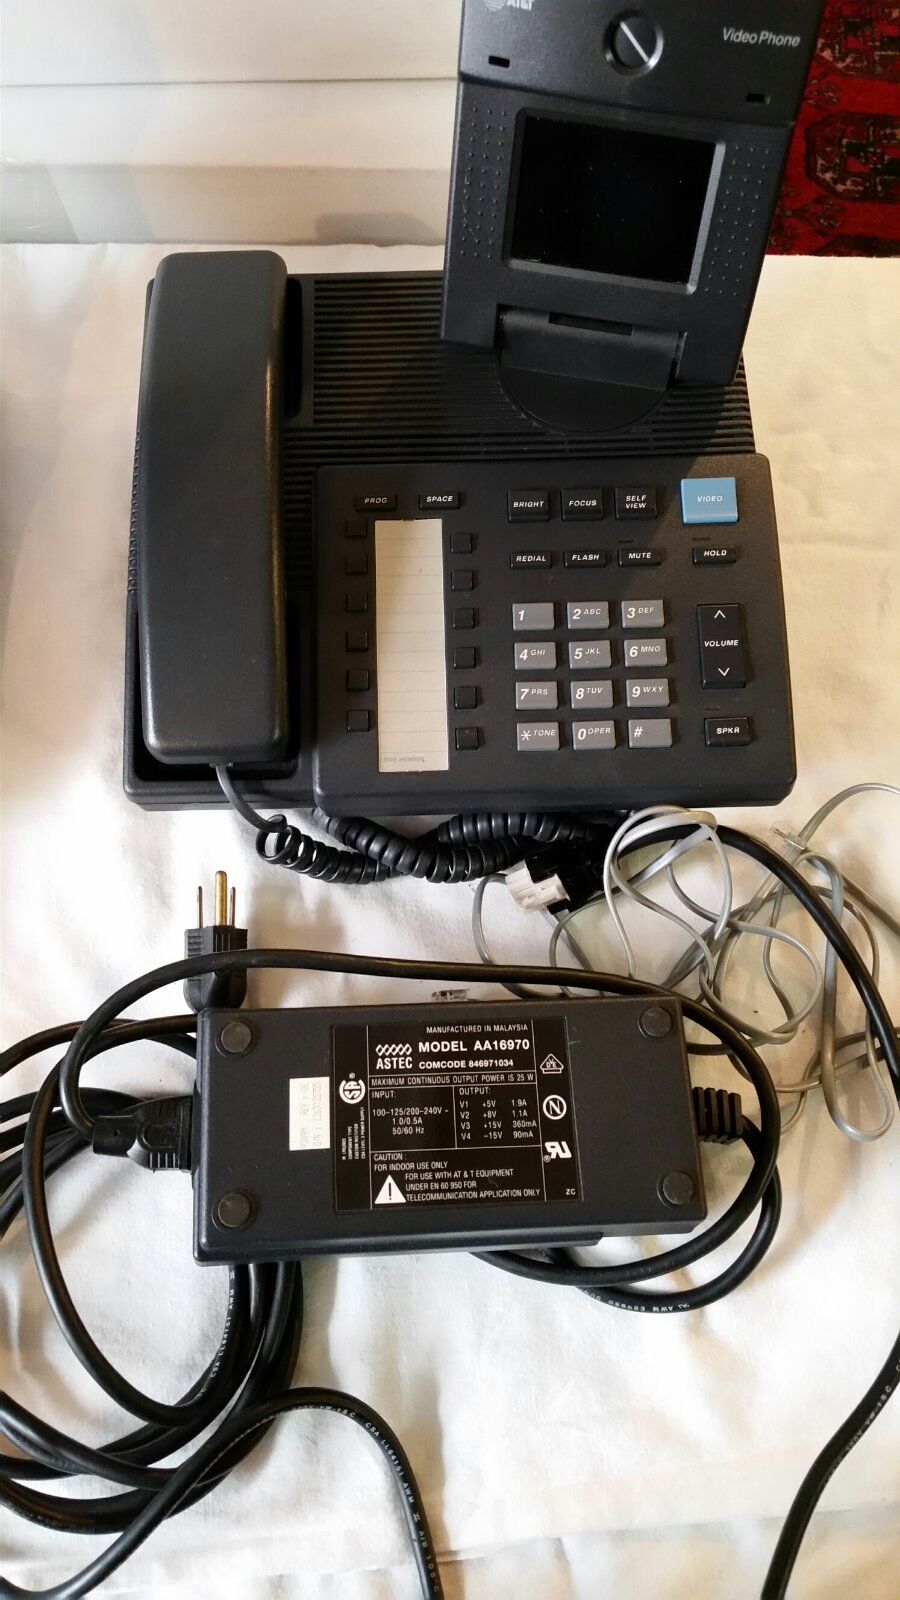 AT&T Videophone 2500 own a pair of historical videophones very good working cond